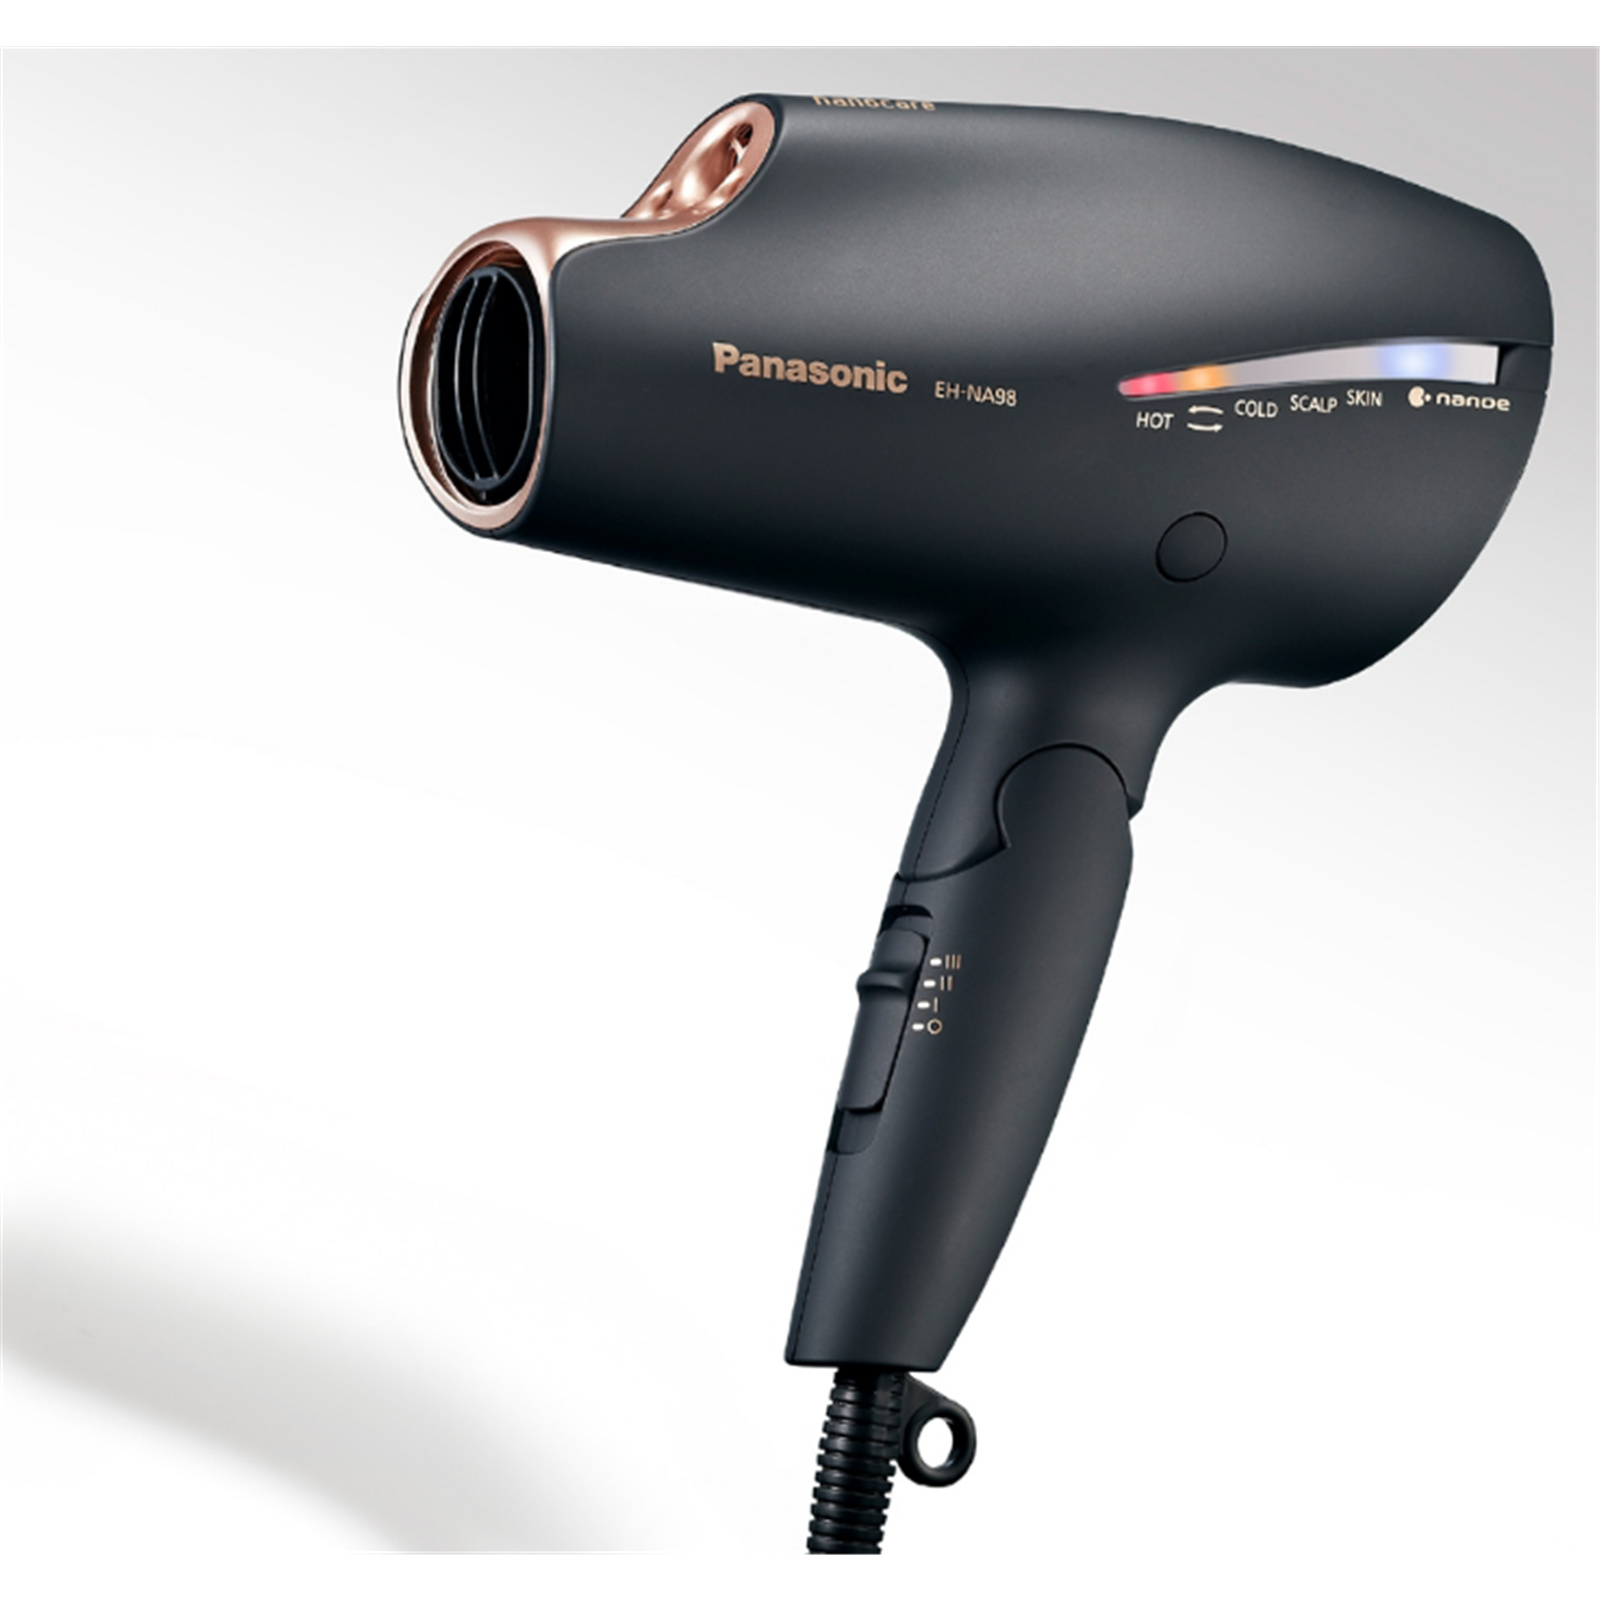 Buy the Panasonic 1800W Nanoe Mineral Hair Dryer intelligent temperature...  ( EH-NA98-K765 ) online - PBTech.com/pacific